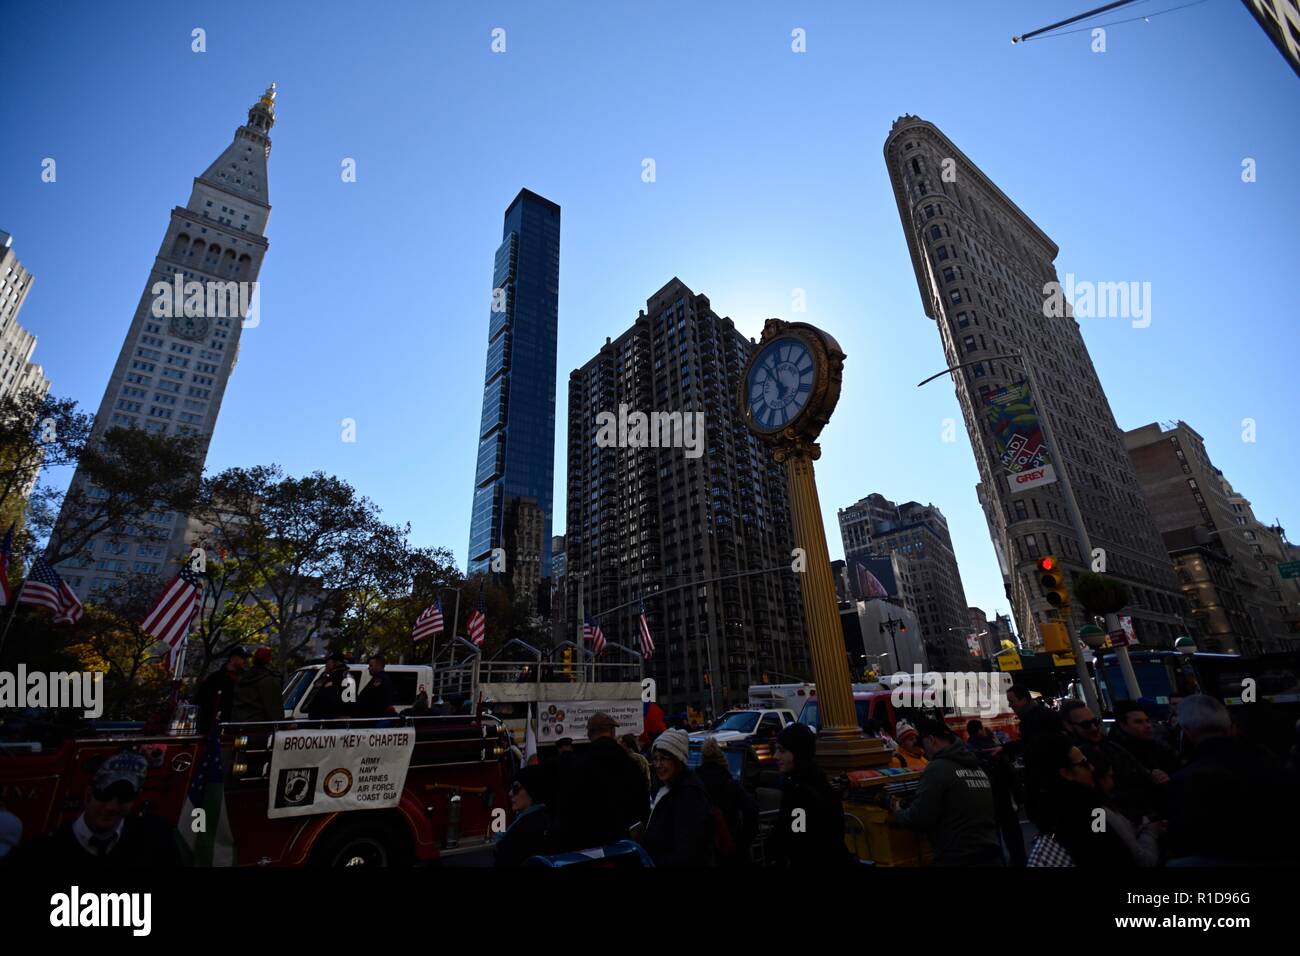 New York, U.S. 11 Nov 2018 A clock reads 11 A.M. as participants prepare to march in New York City’s annual Veterans Day Parade, on the 100th anniversary of the end of World War I. Stock Photo